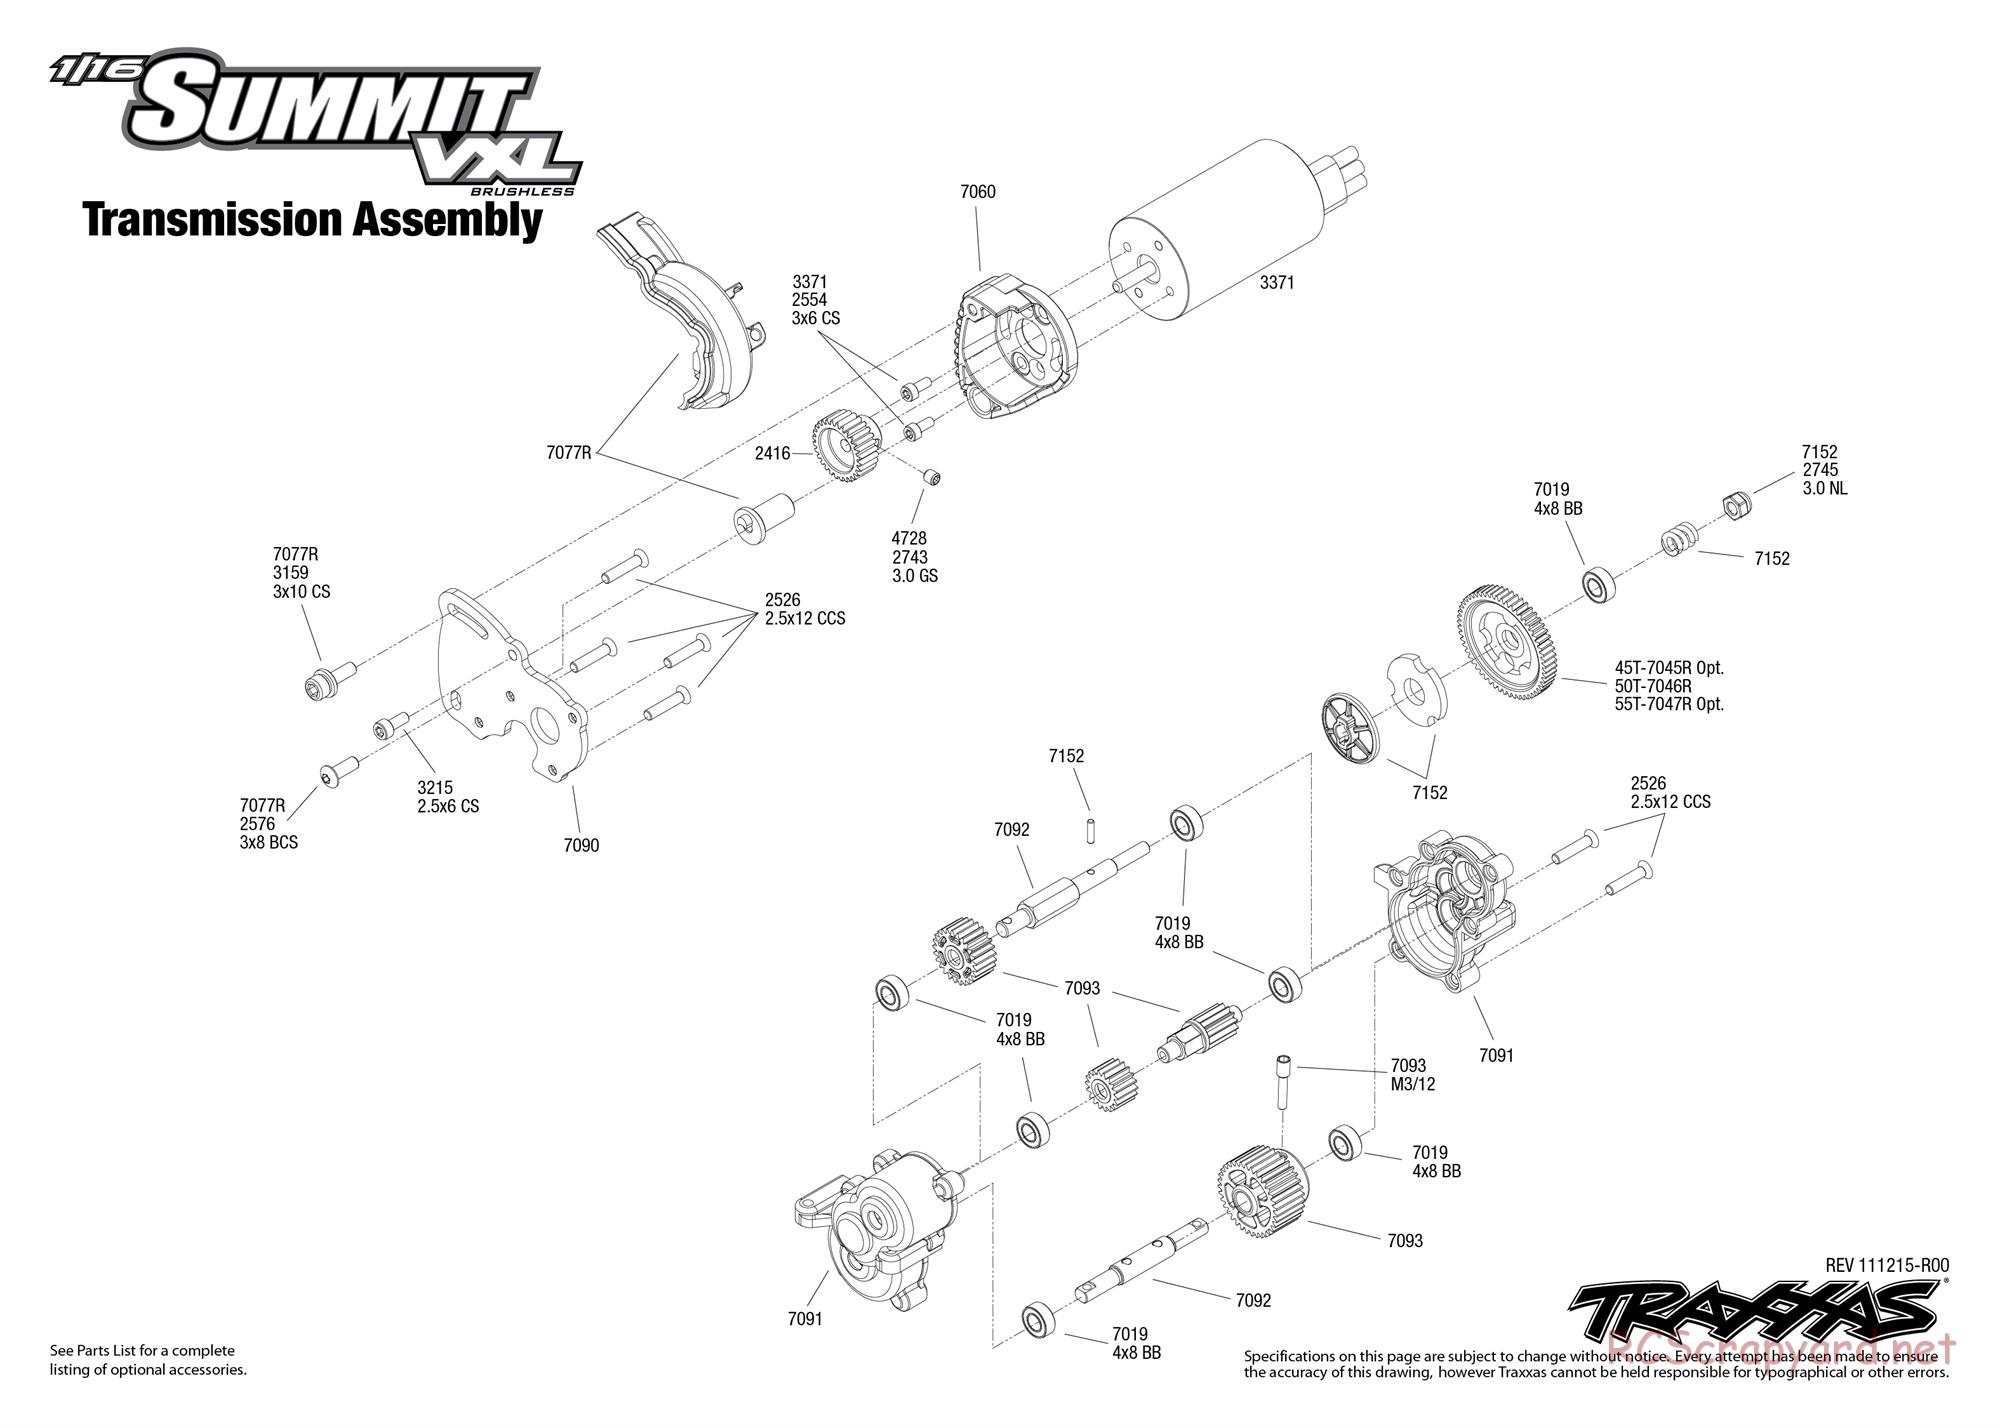 Traxxas - 1/16 Summit VXL (2010) - Exploded Views - Page 5